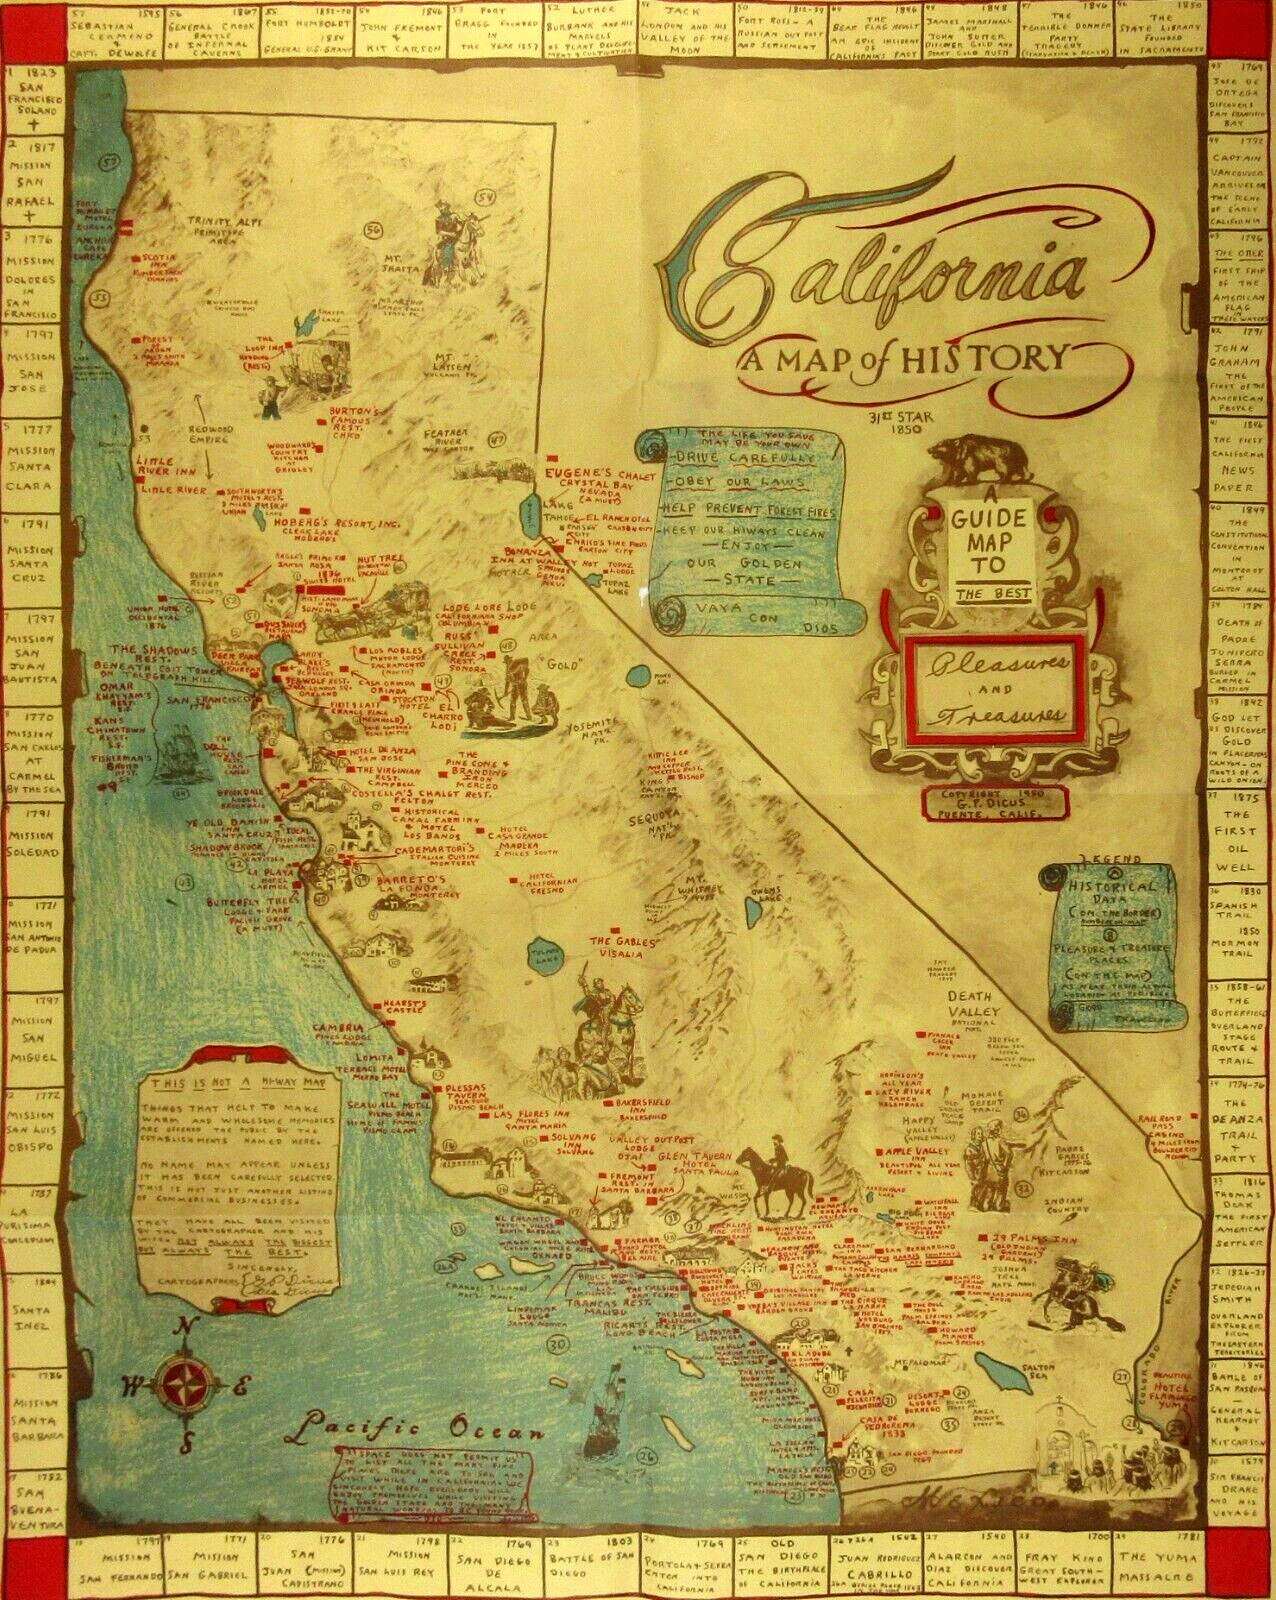 California Illustrated Map of History Missions Timeline Gold Rush GP Dicus 1950